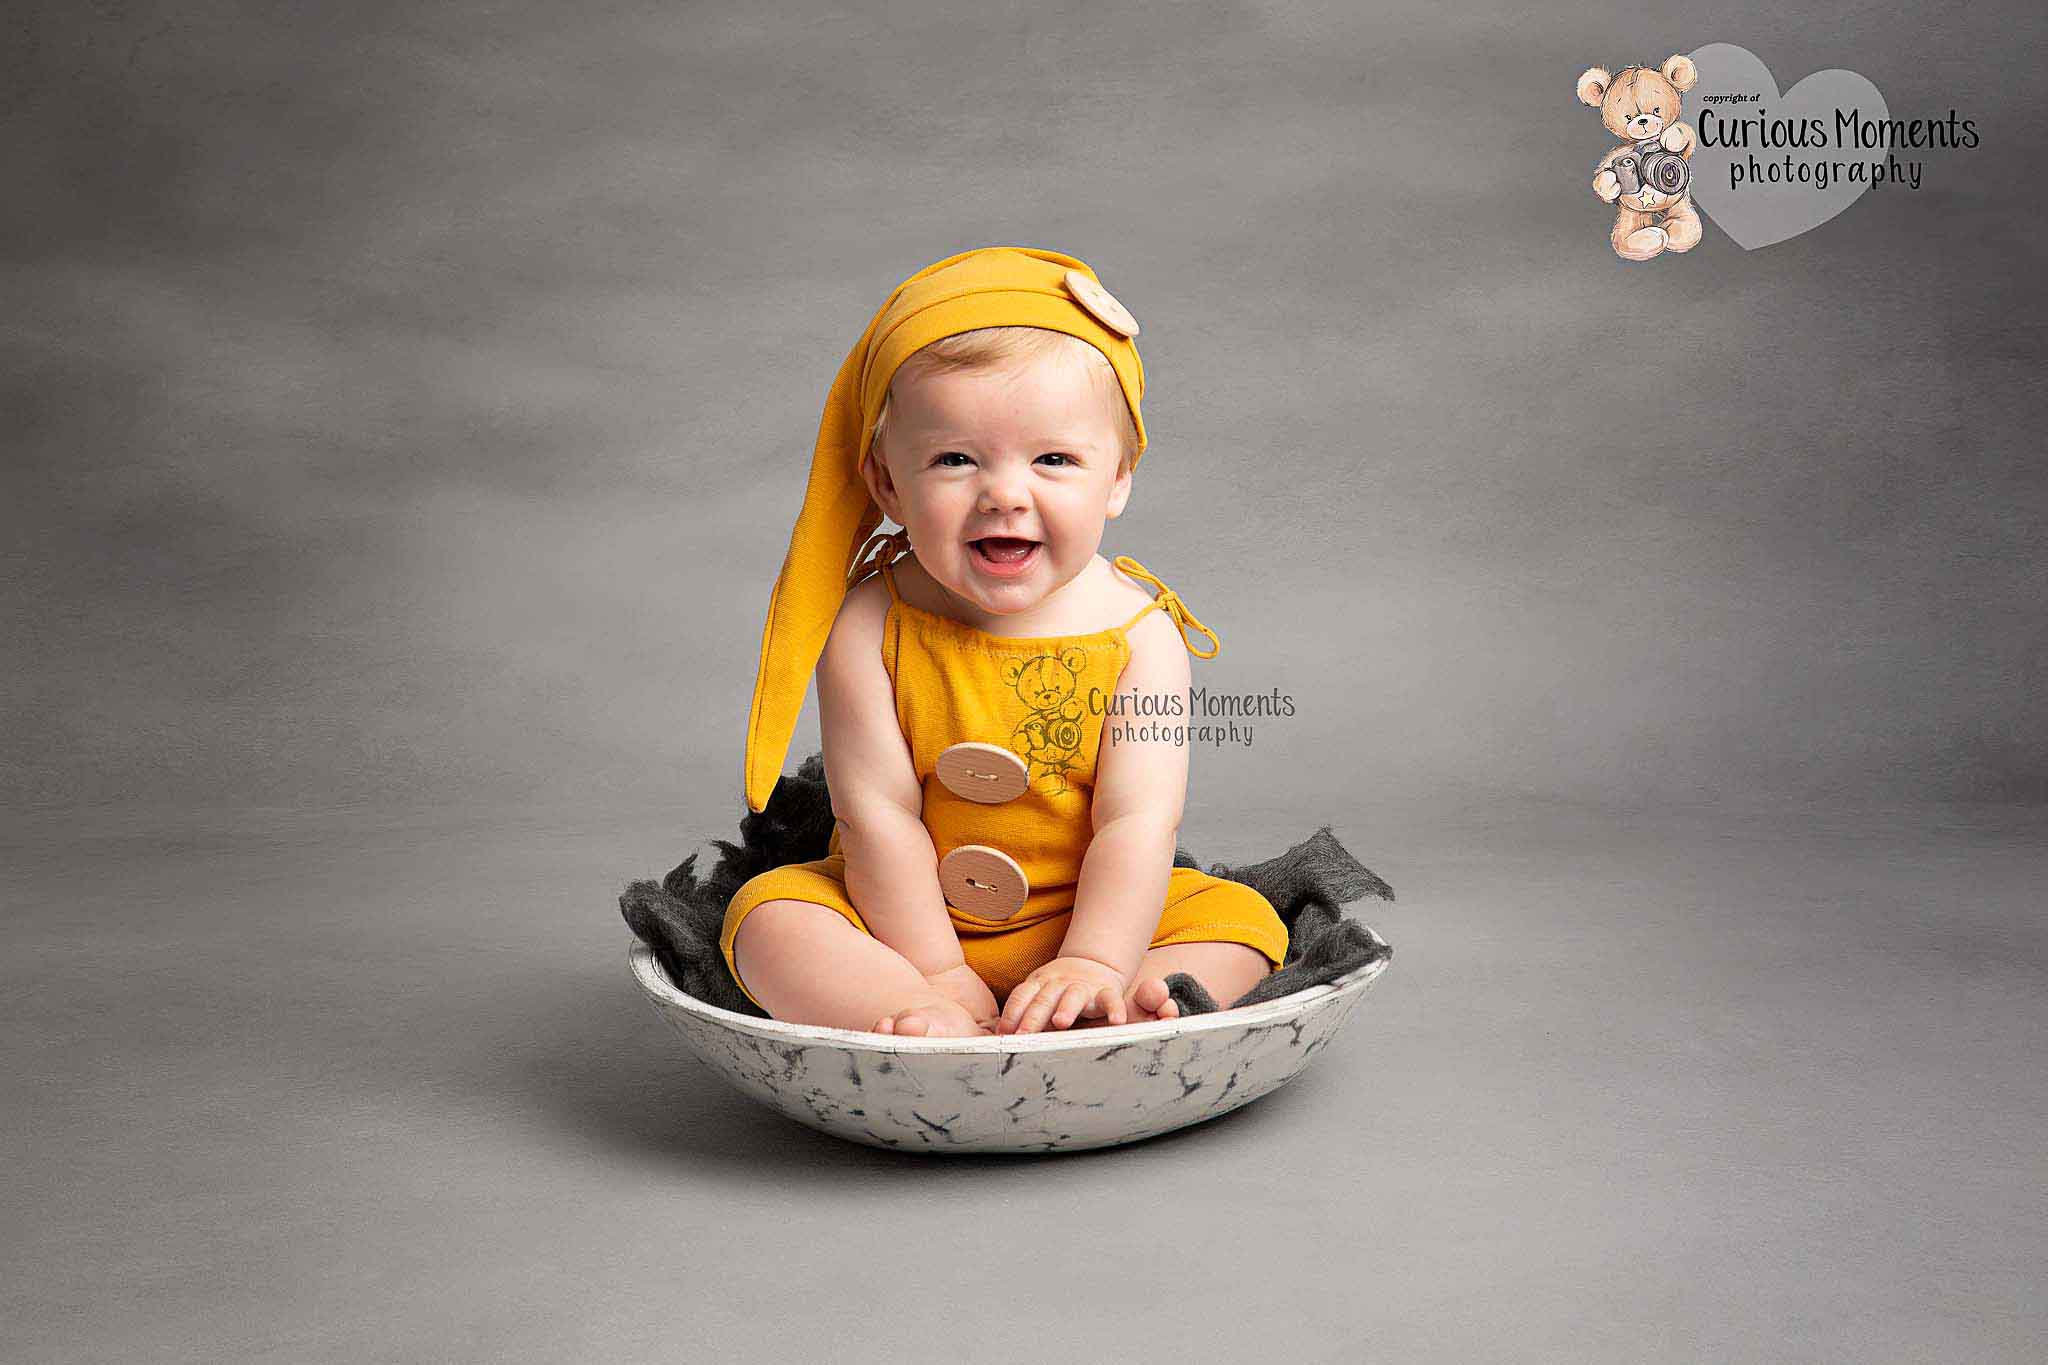 Baby bow wearning yellow romper and sleepy hat sat in a white mottled bowl on a grey background